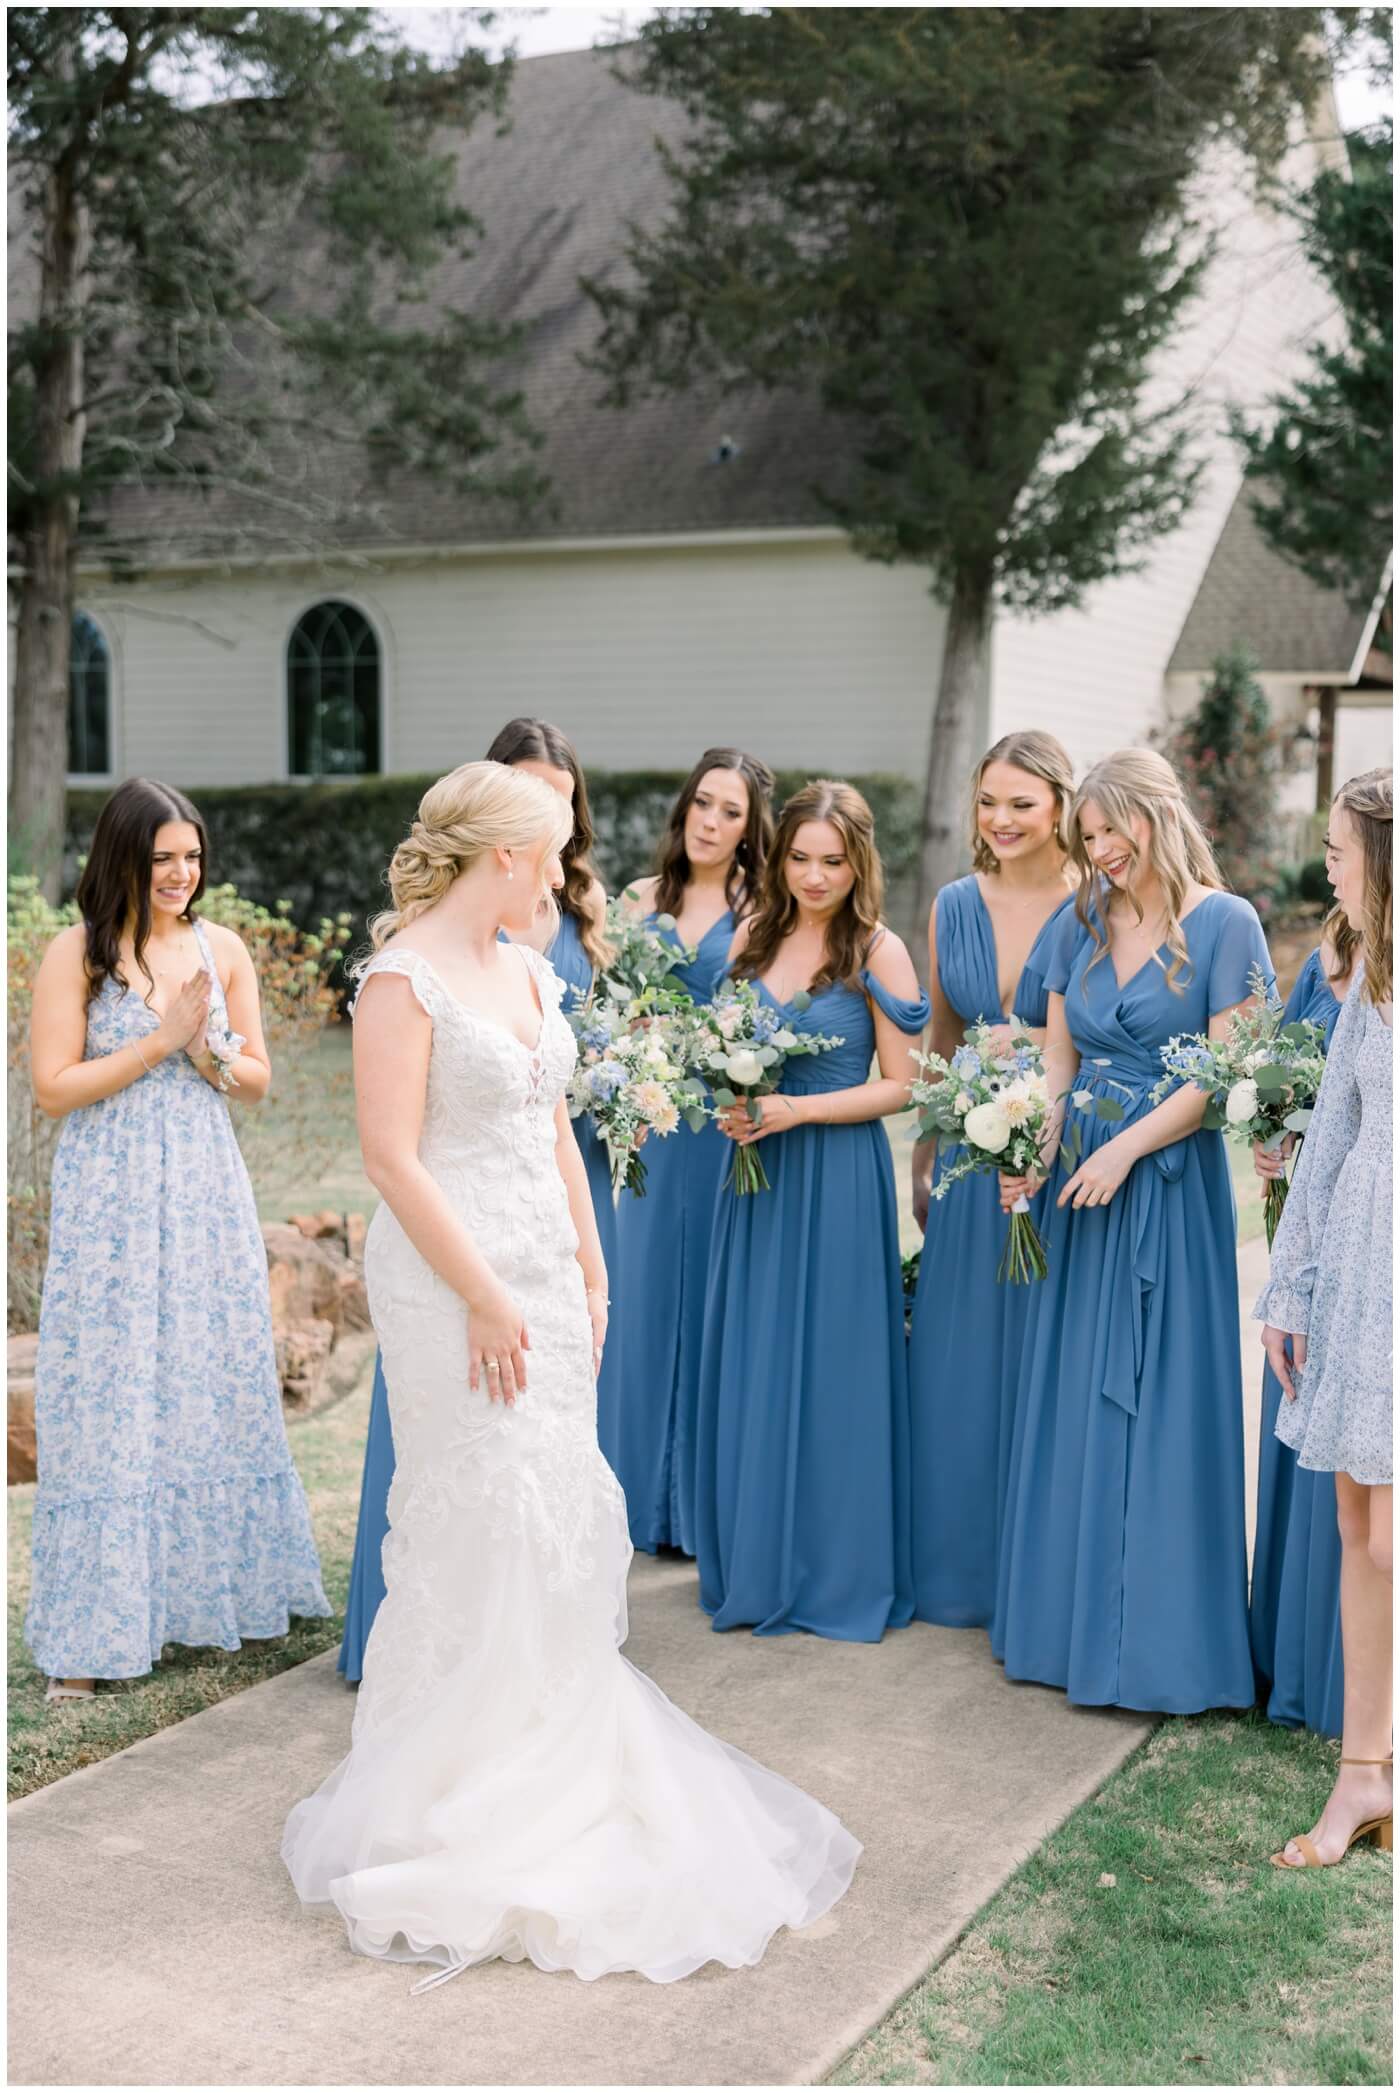 A bride and her bridesmaids at The Vine